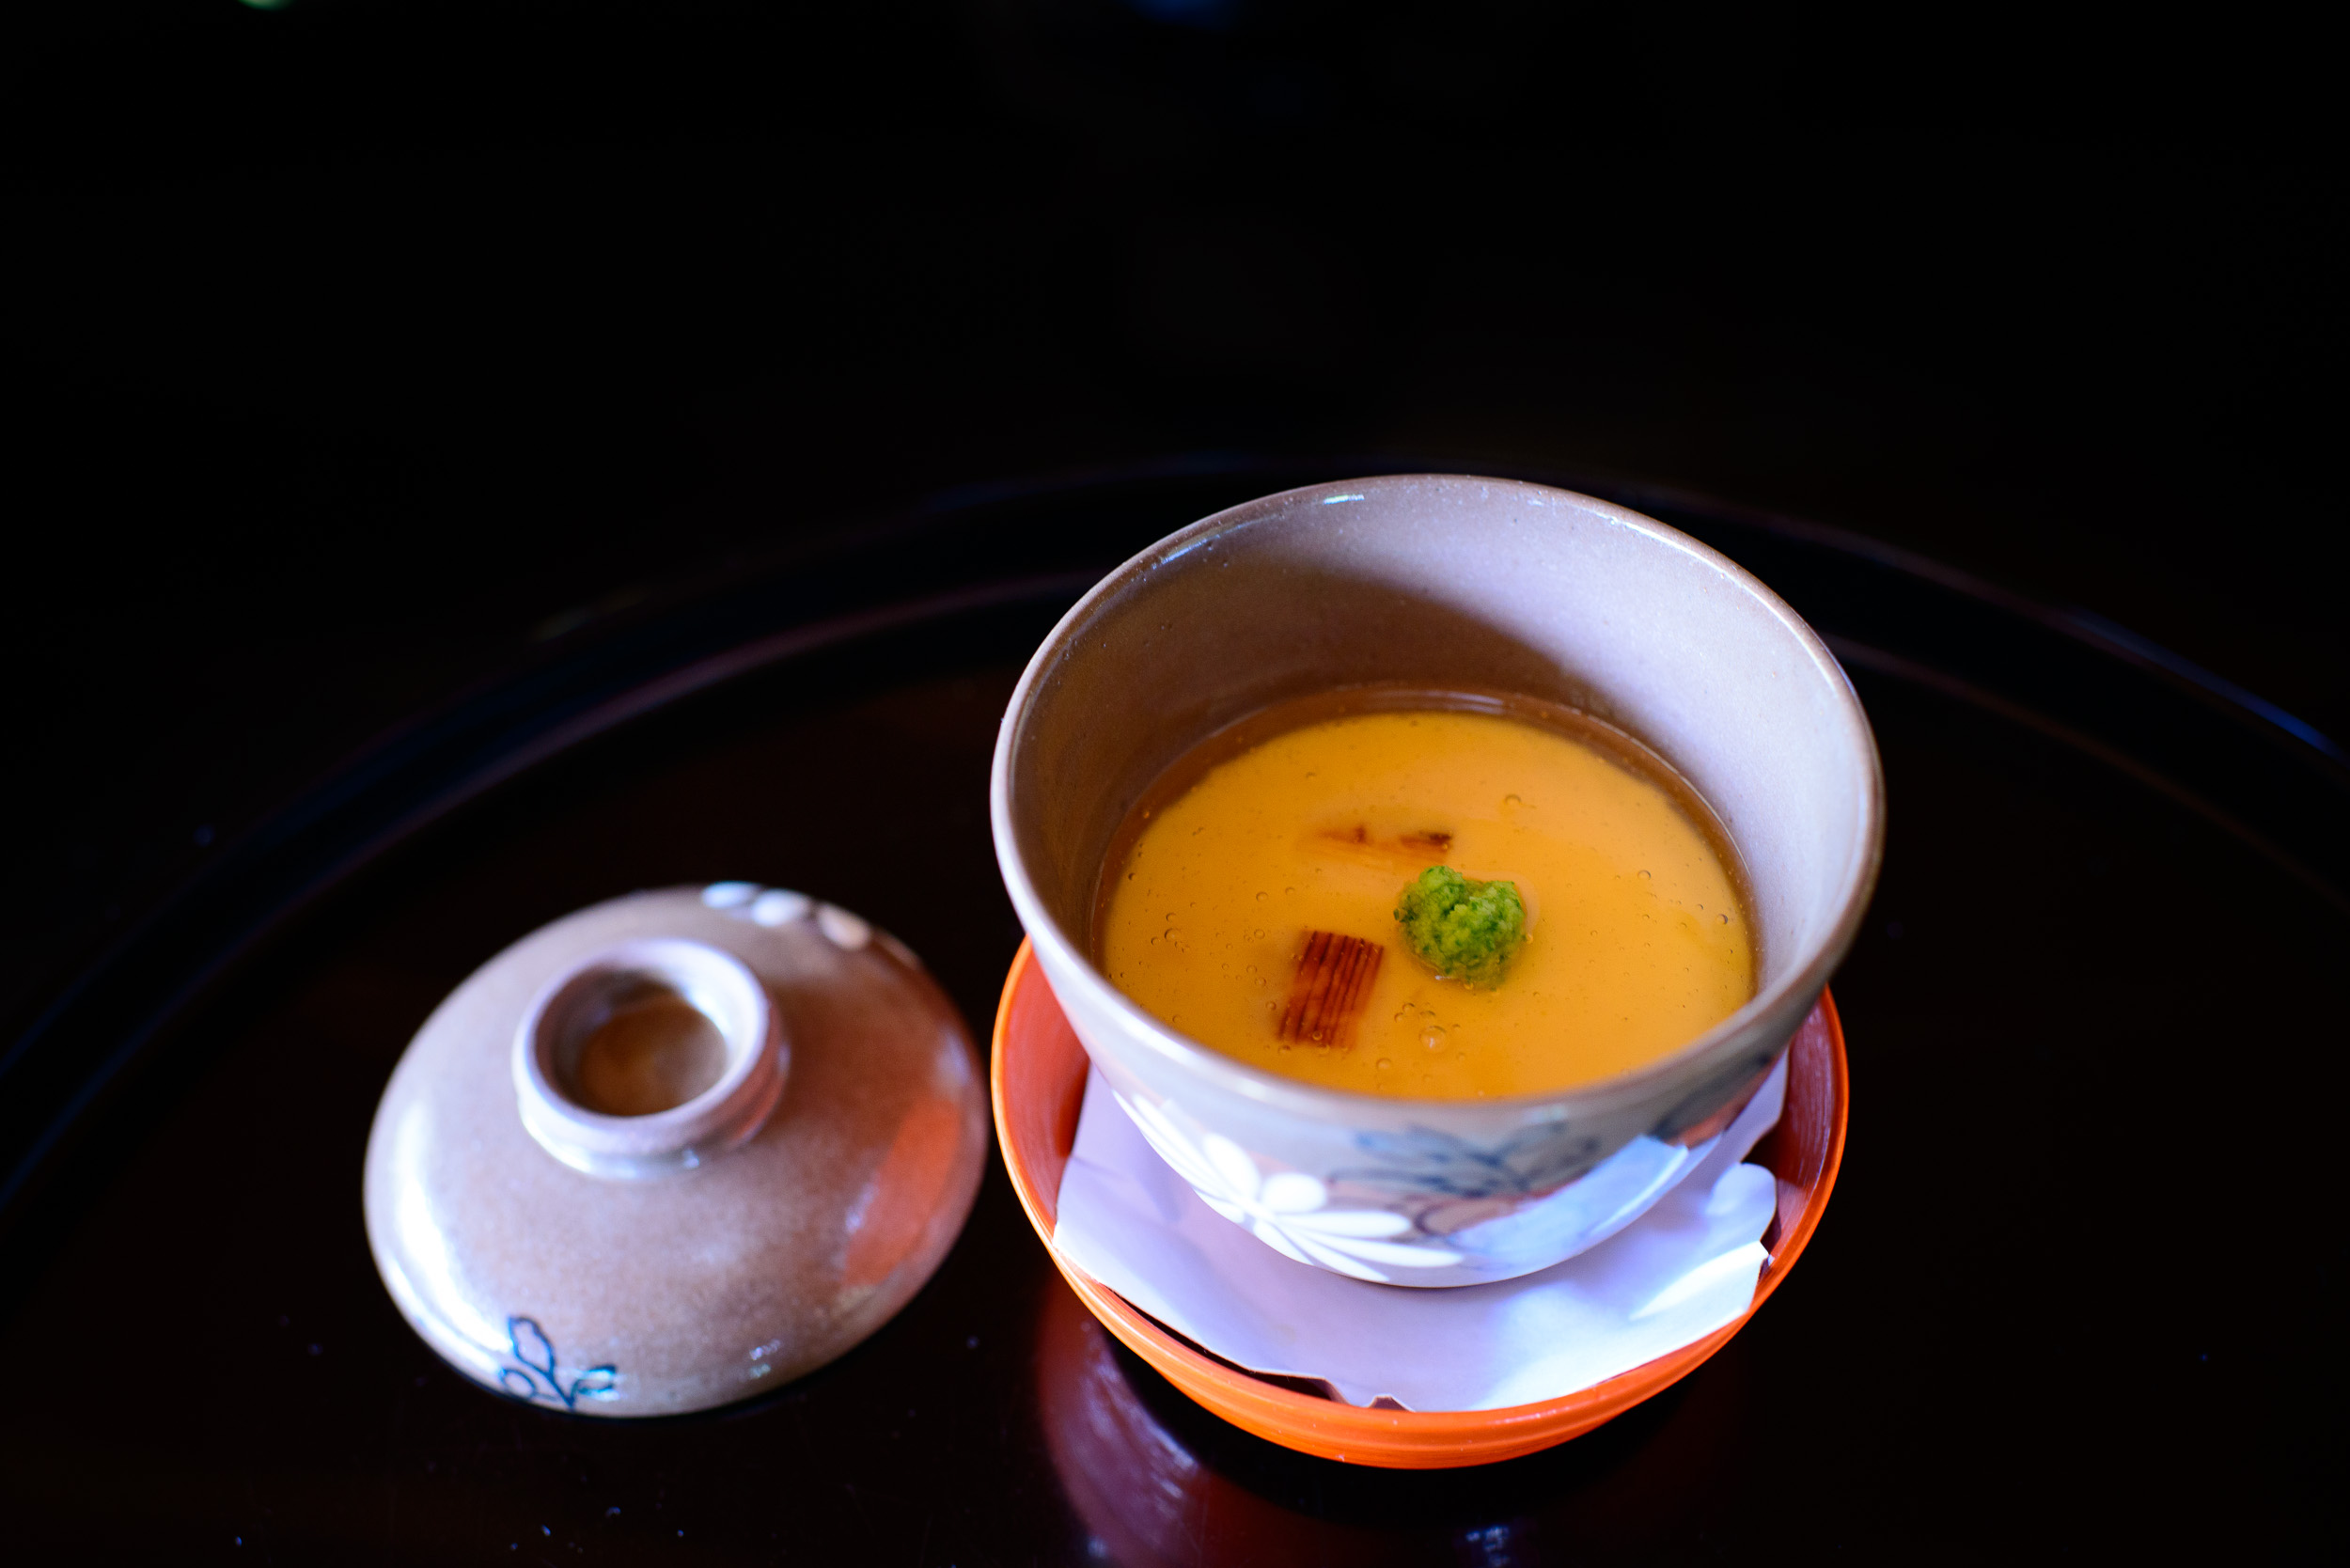 6th Course: Chawanmushi - steamed egg custard with soft-shelled